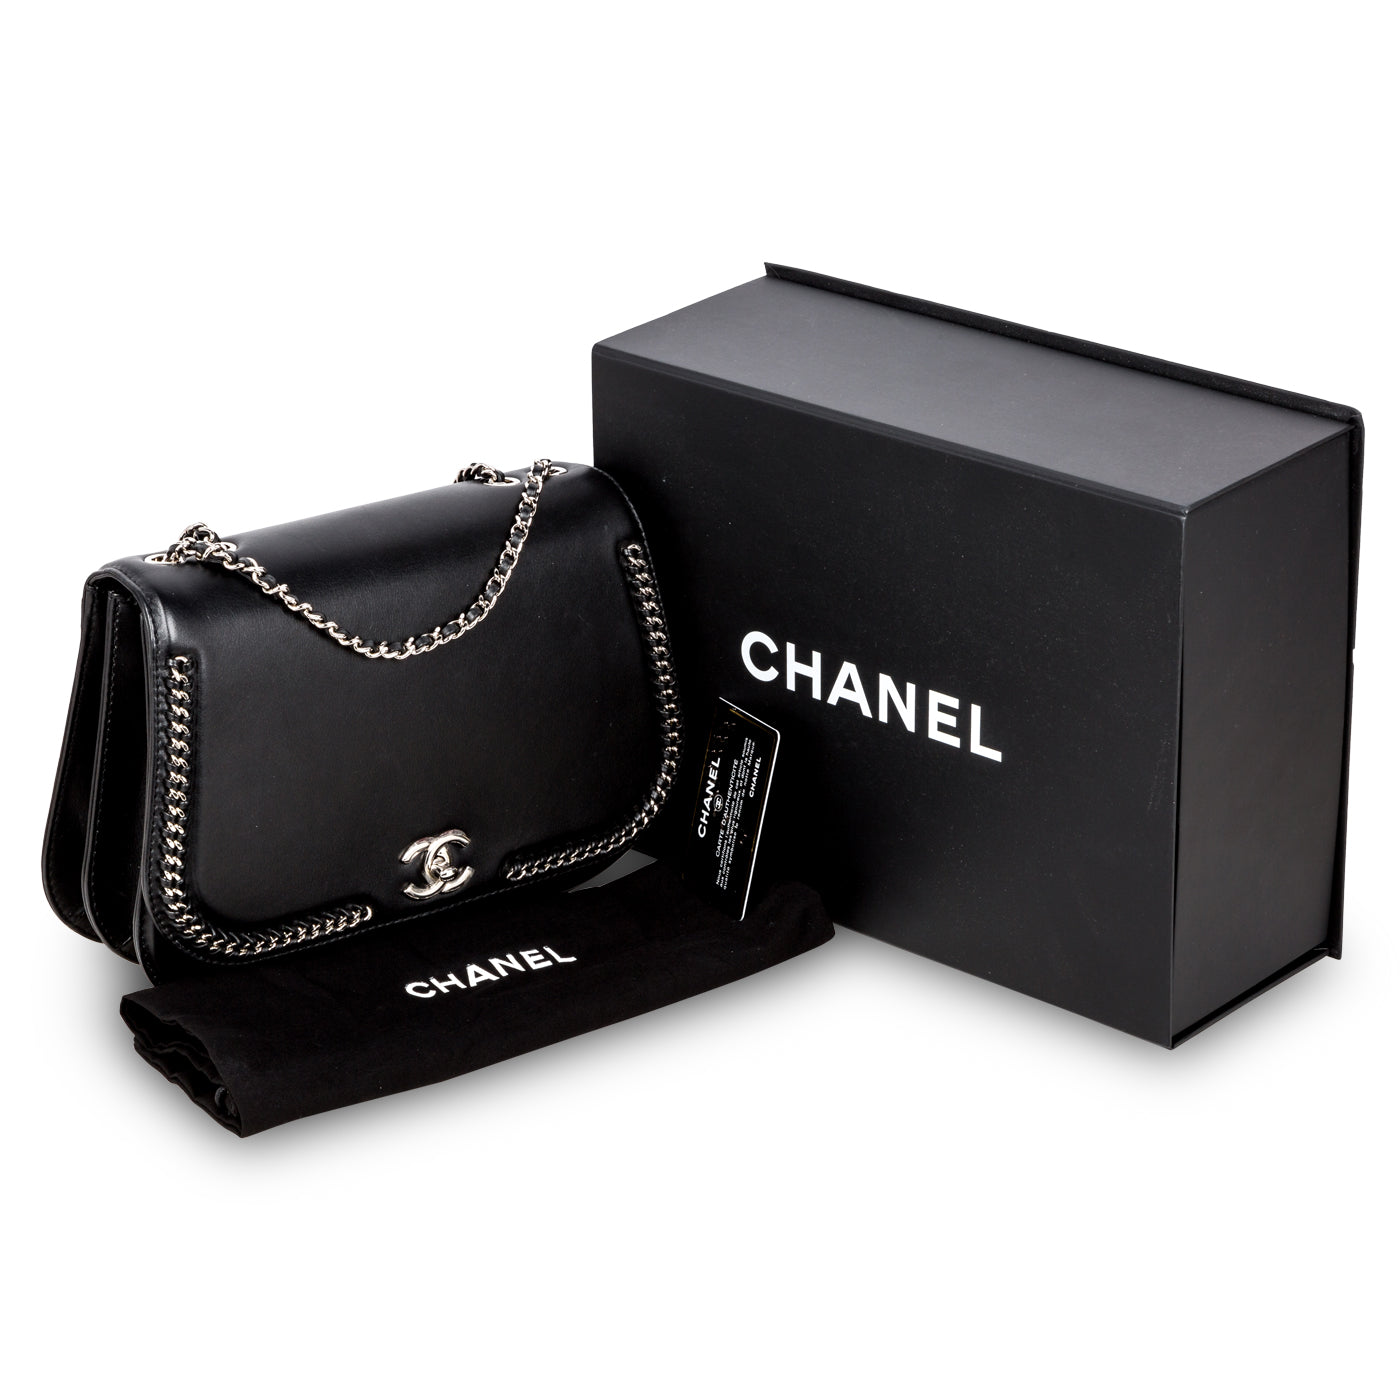 Chanel Braided Chic Small Flap Bag